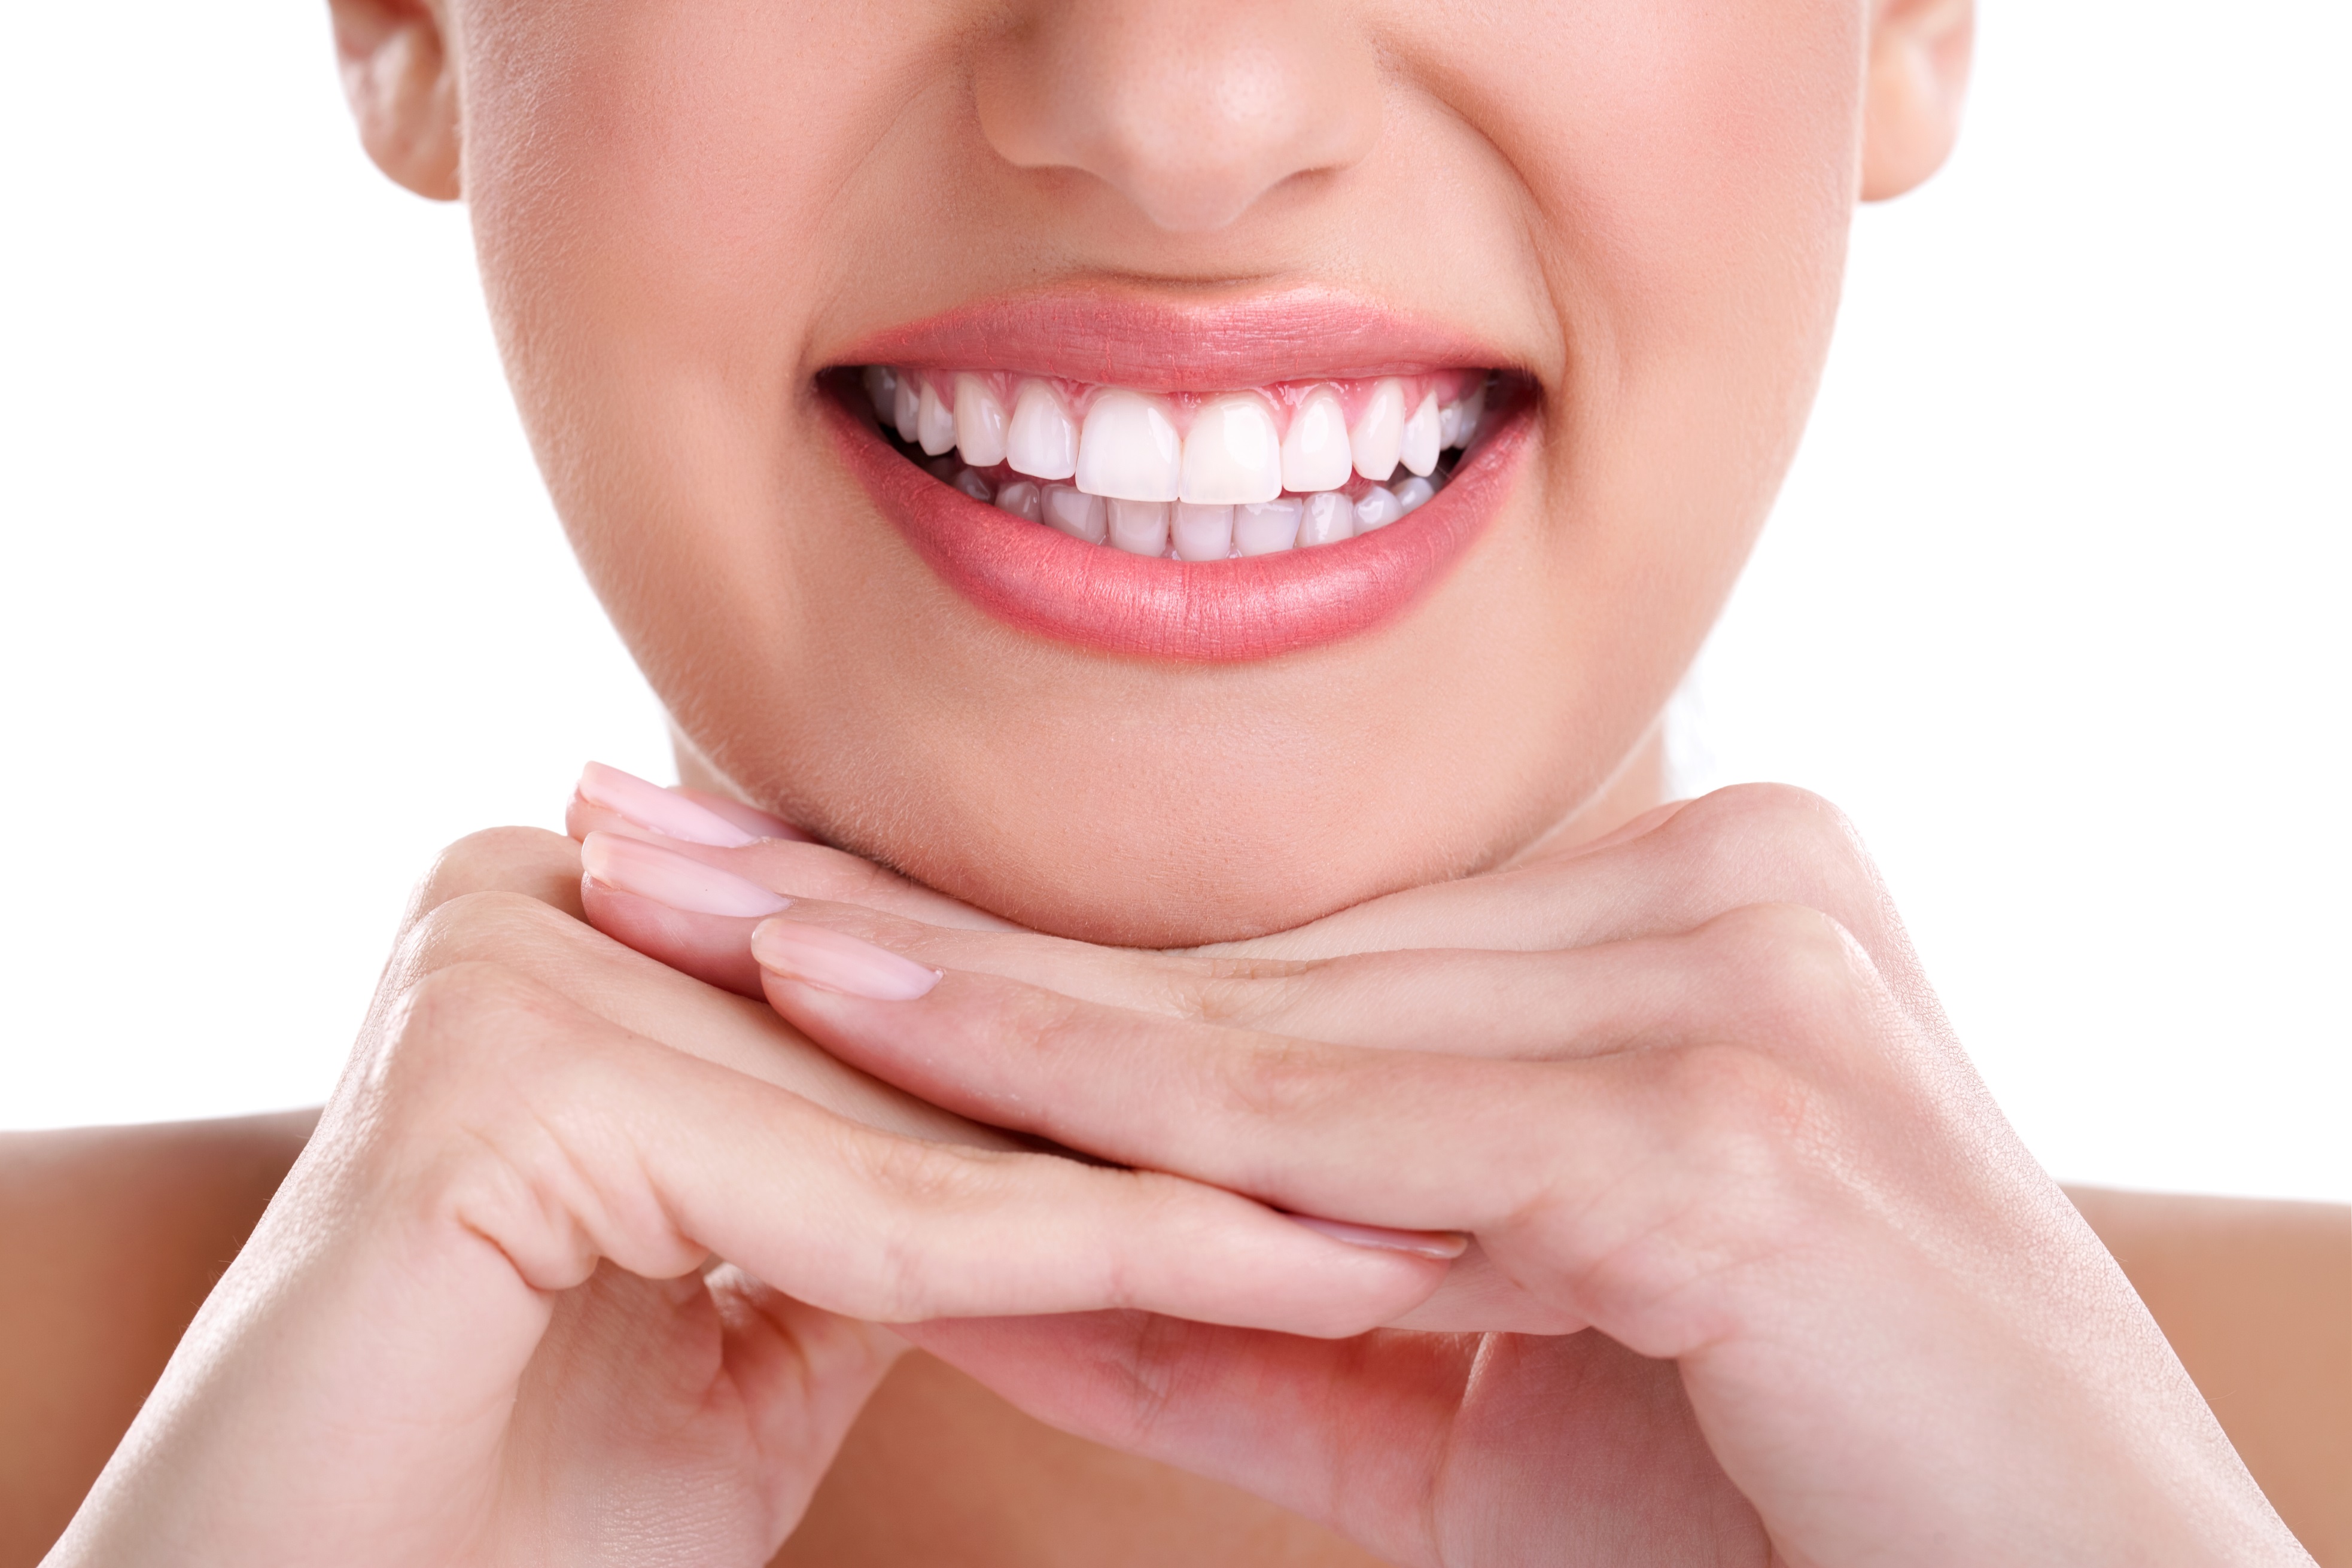 We are the best teeth whitening dentistry in Sydney.